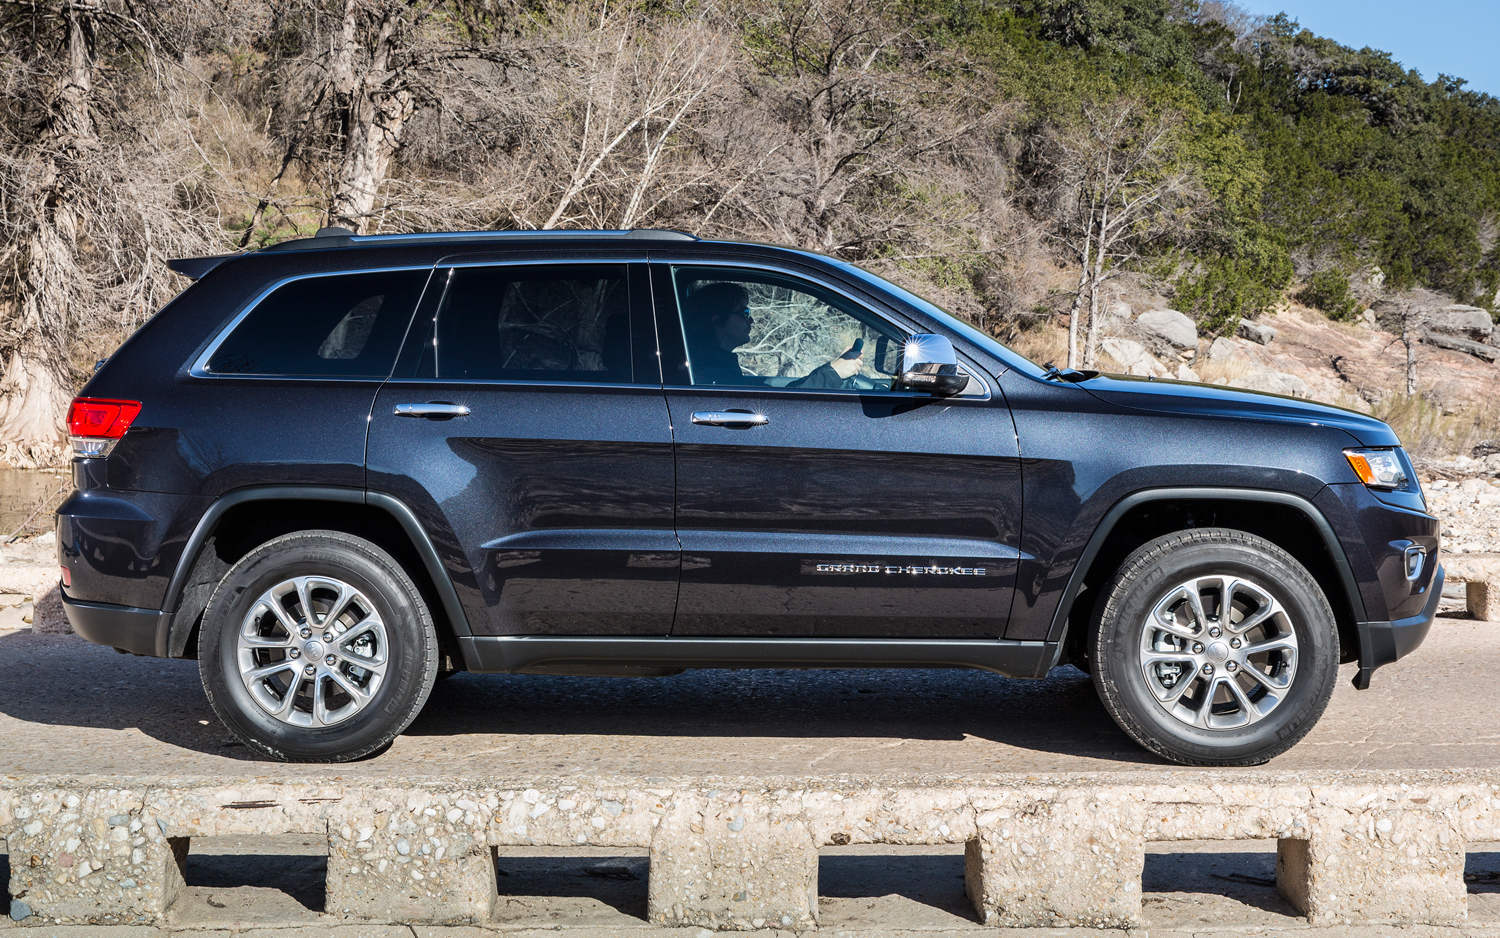 Grand Cherokee Pictures HD Jeep Diesel Side Photo